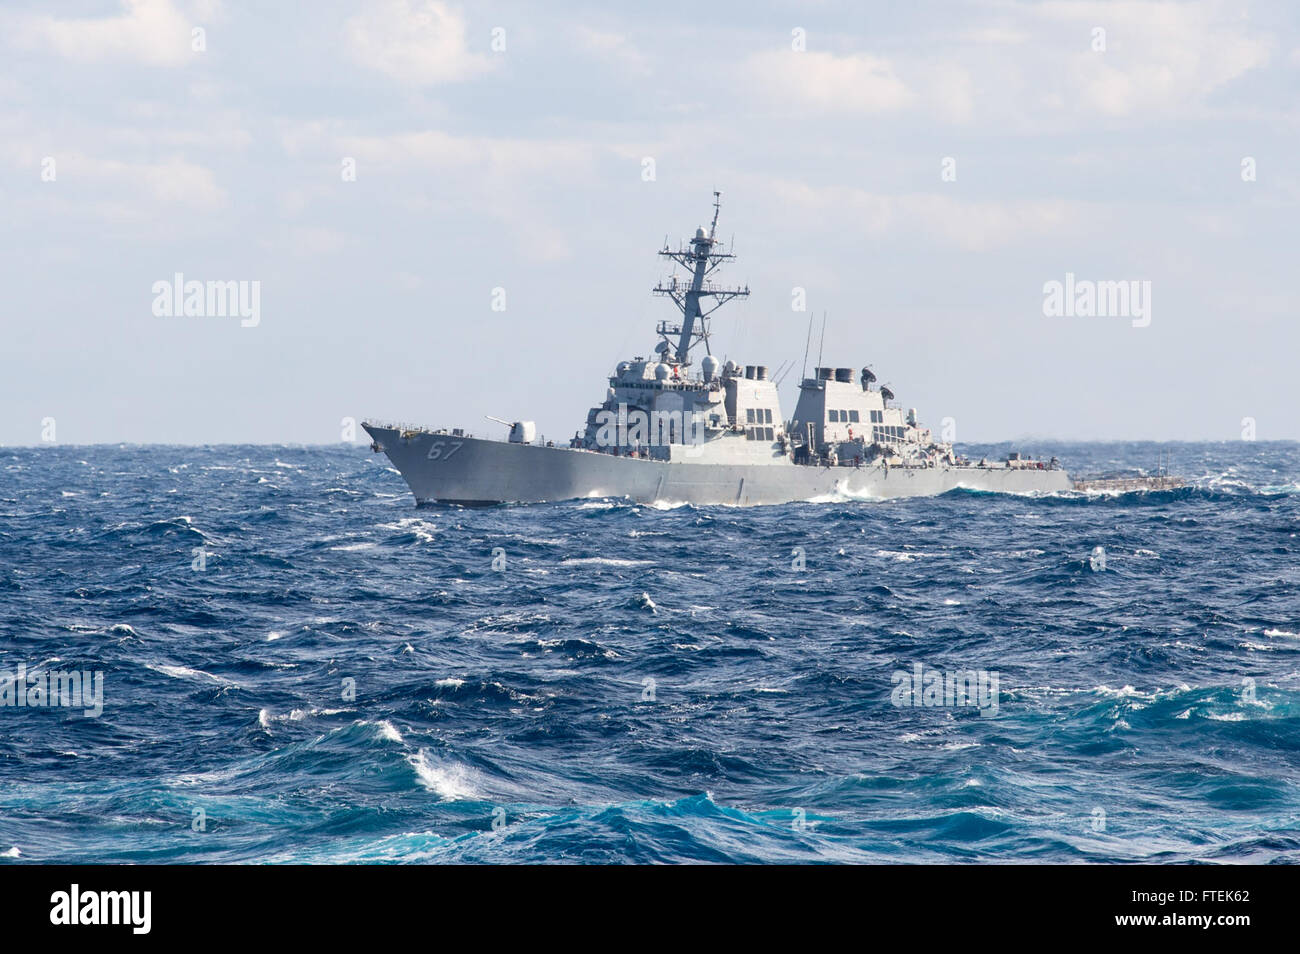 150109-N-XG464-155 MEDITERRANEAN SEA (Jan. 9, 2015) The Arleigh Burke-class guided-missile destroyer USS Cole (DDG 67) operates in the Mediterranean Sea Jan. 9, 2015. Cole, homeported in Norfolk, is conducting naval operations in the U.S. 6th Fleet area of operations in support of U.S. national security interests in Europe. (U.S. Navy photo by Mass Communication Specialist 3rd Class Jonathan B. Trejo/Released) Stock Photo